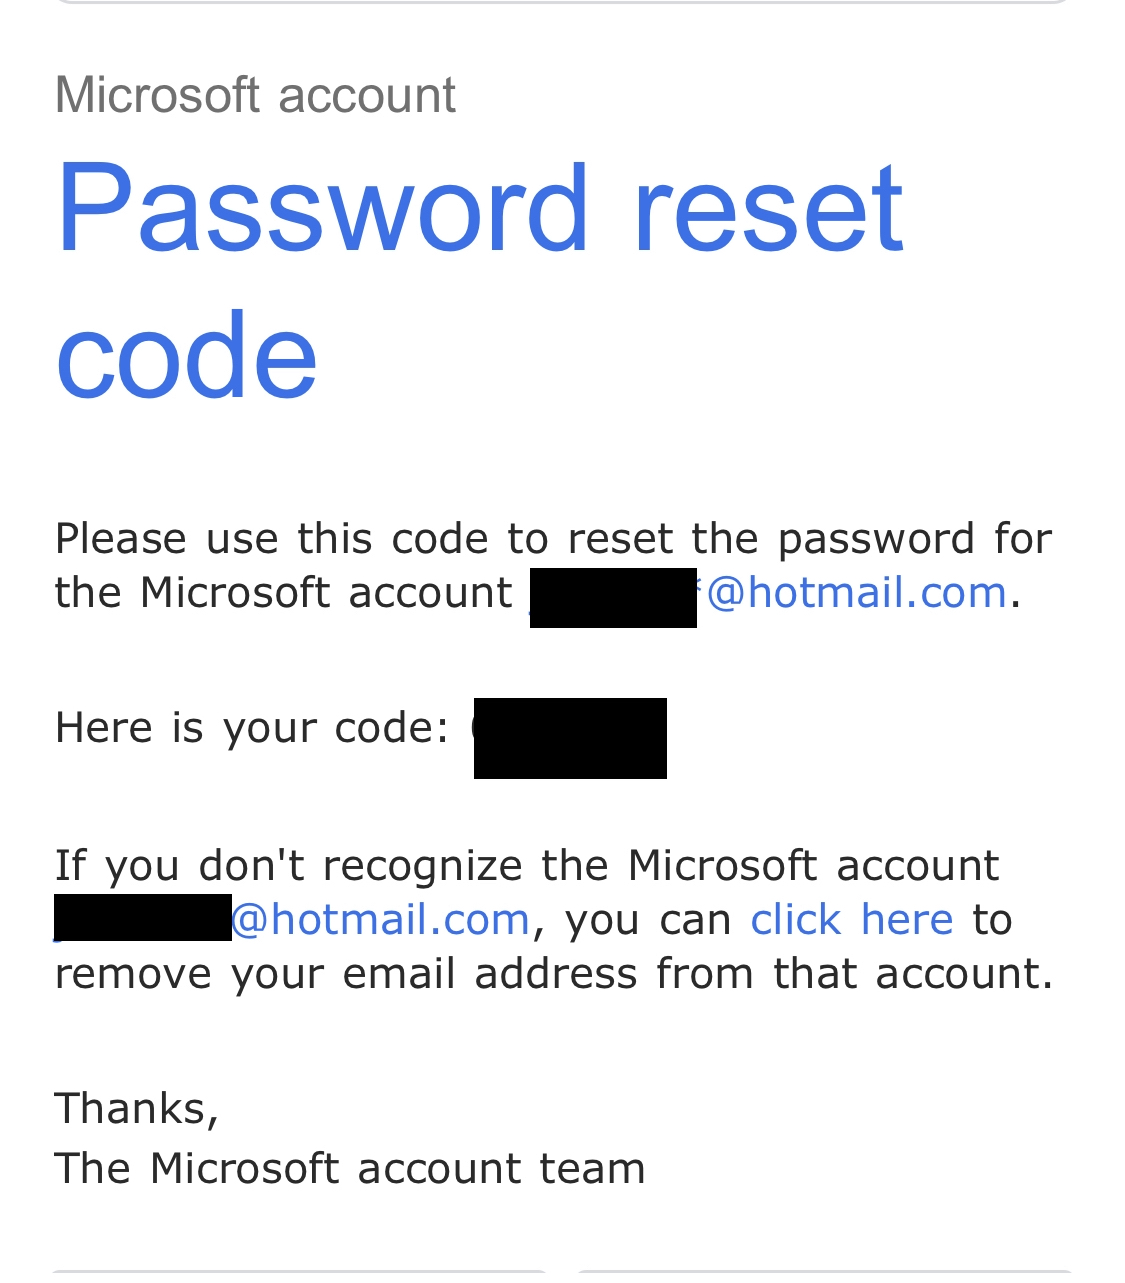 Receiving password reset codes w/out requesting any - Microsoft